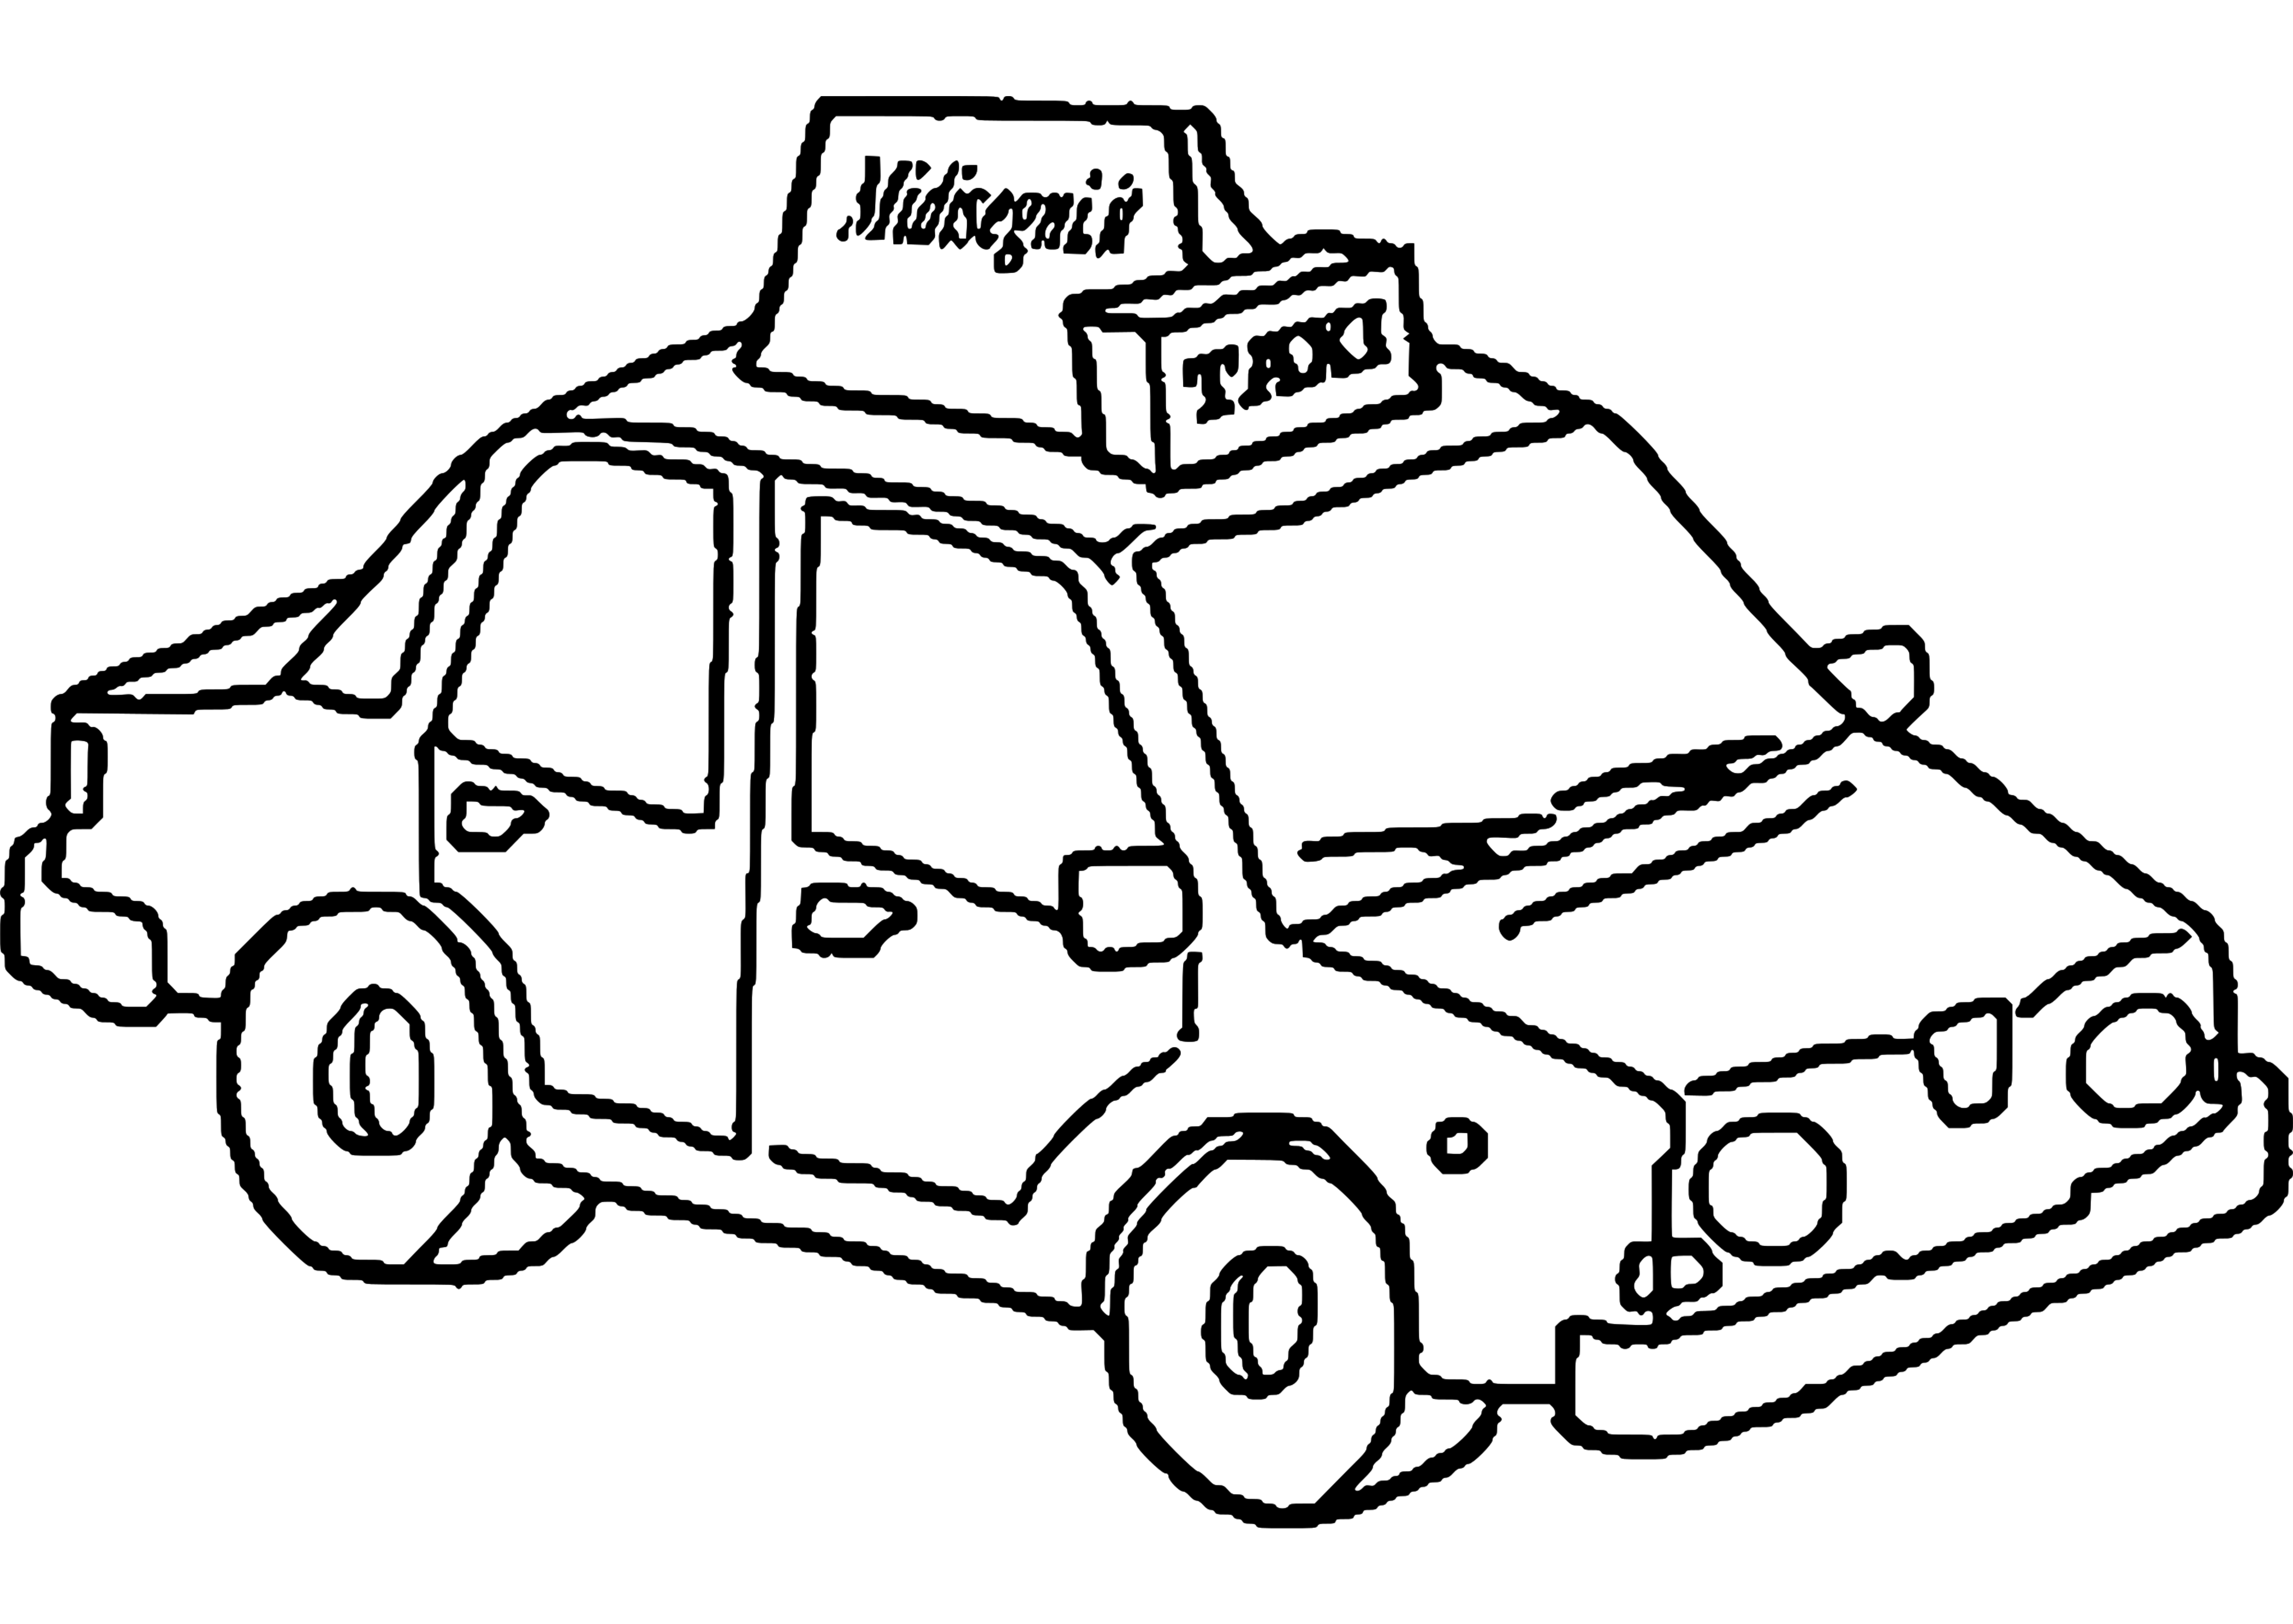 Taxi #21 (Transportation) – Printable coloring pages